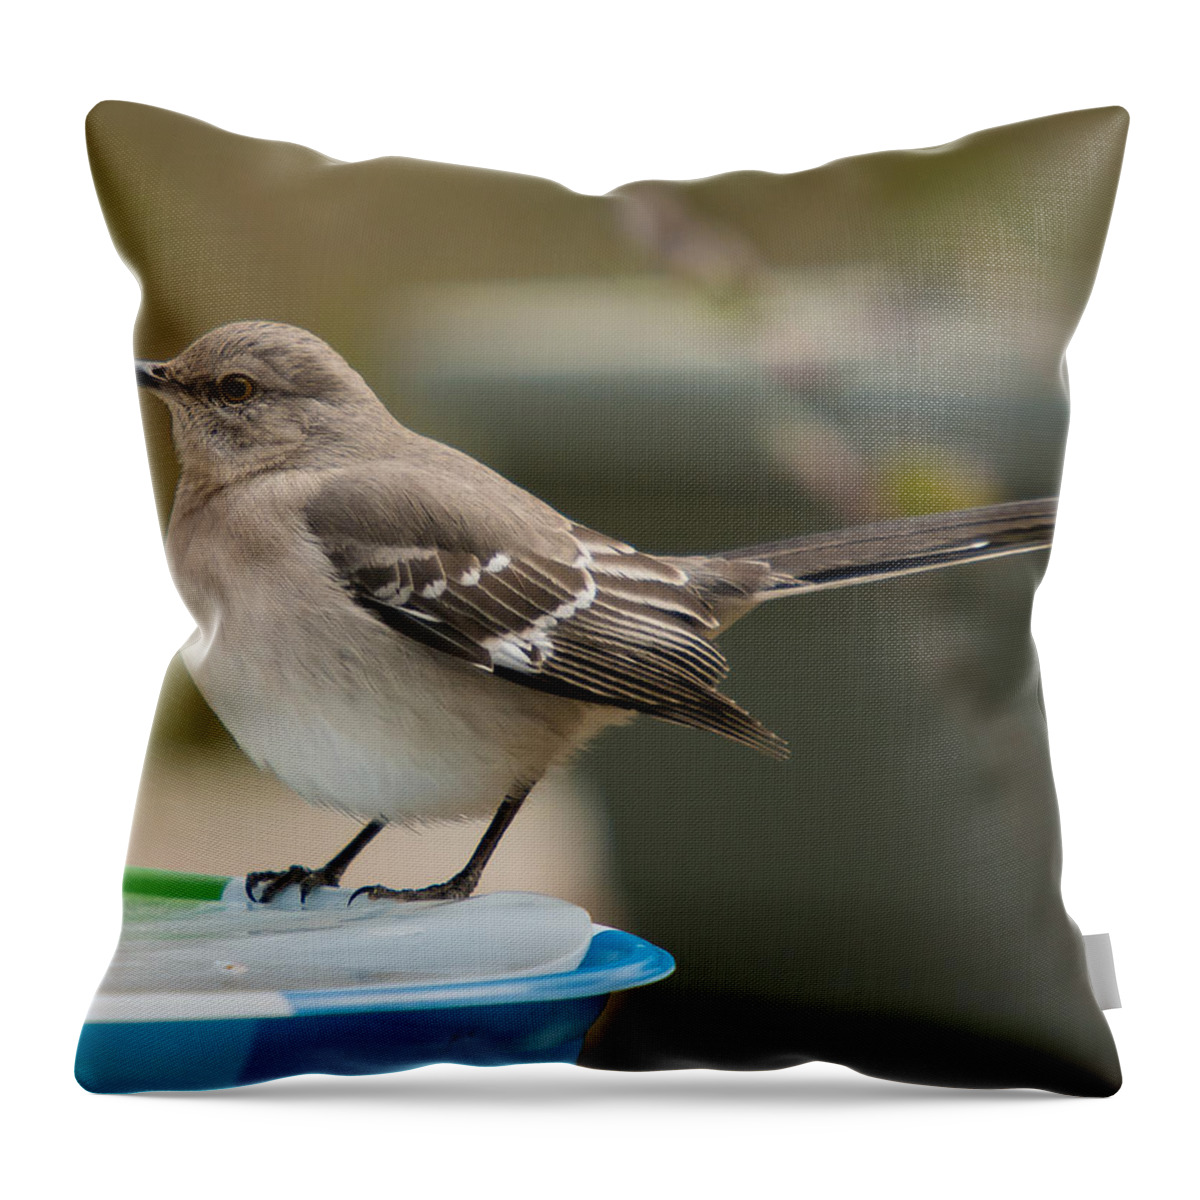 Ice Water Throw Pillow featuring the photograph Ice Water by Robert L Jackson